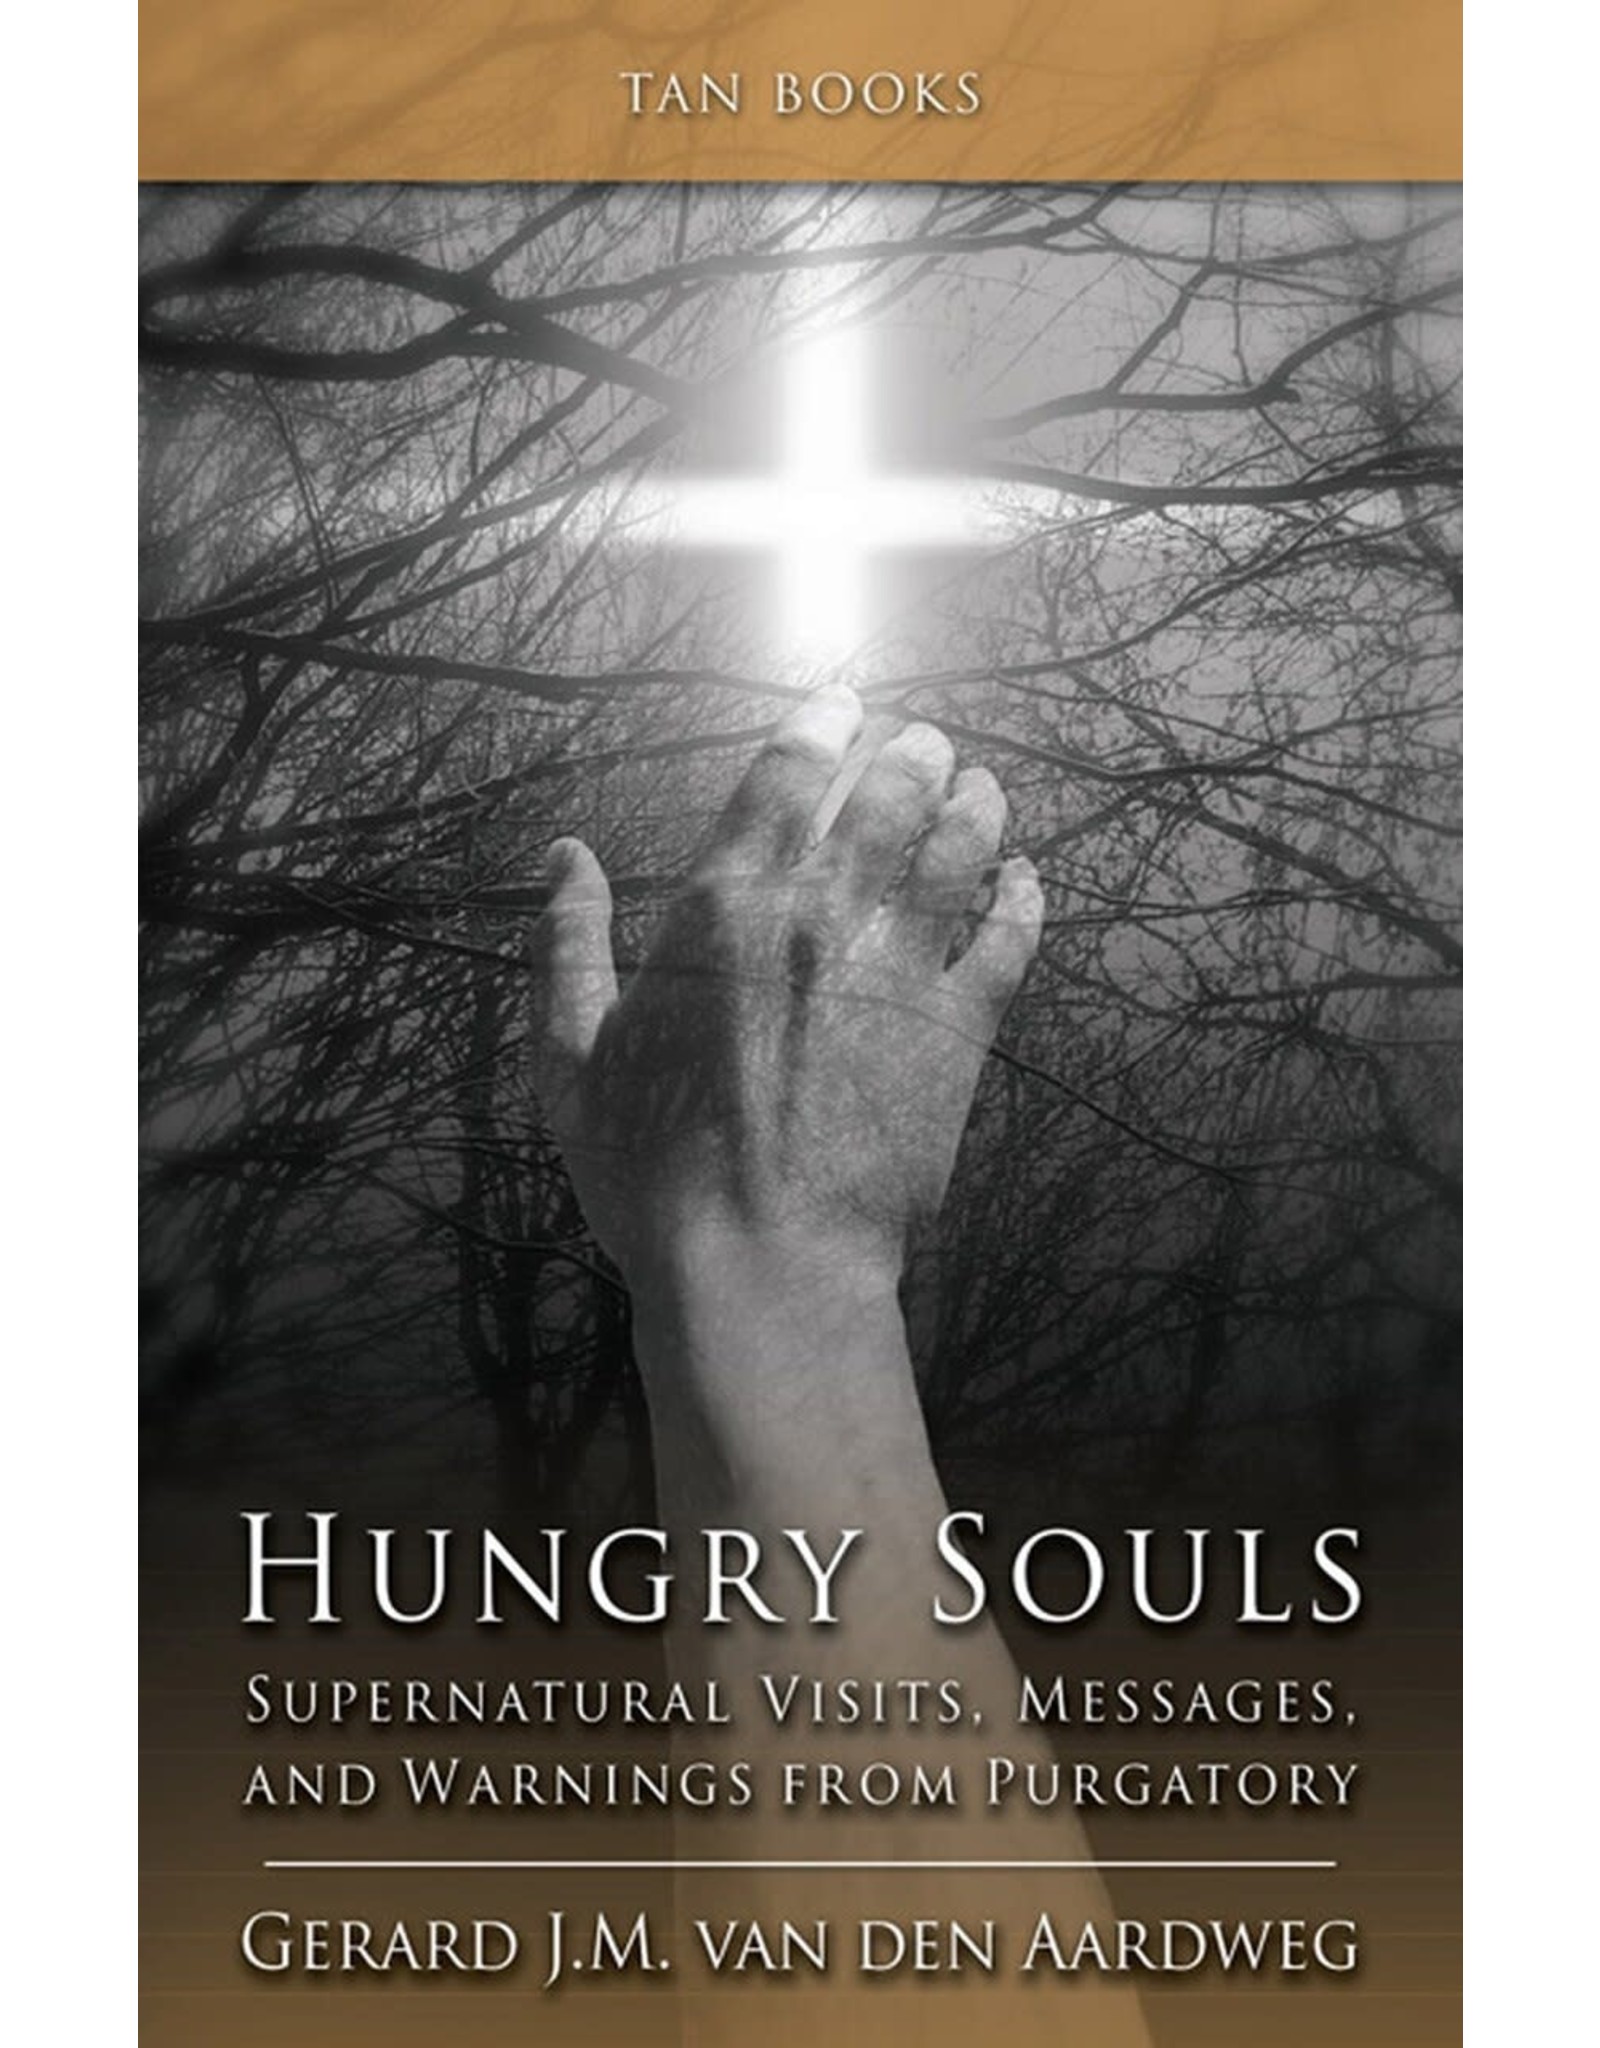 Tan Books Hungry Souls: Supernatural Visits, Messages, and Warnings from Purgatory by Gerard J.M. Van Den Aardweg (Paperback)